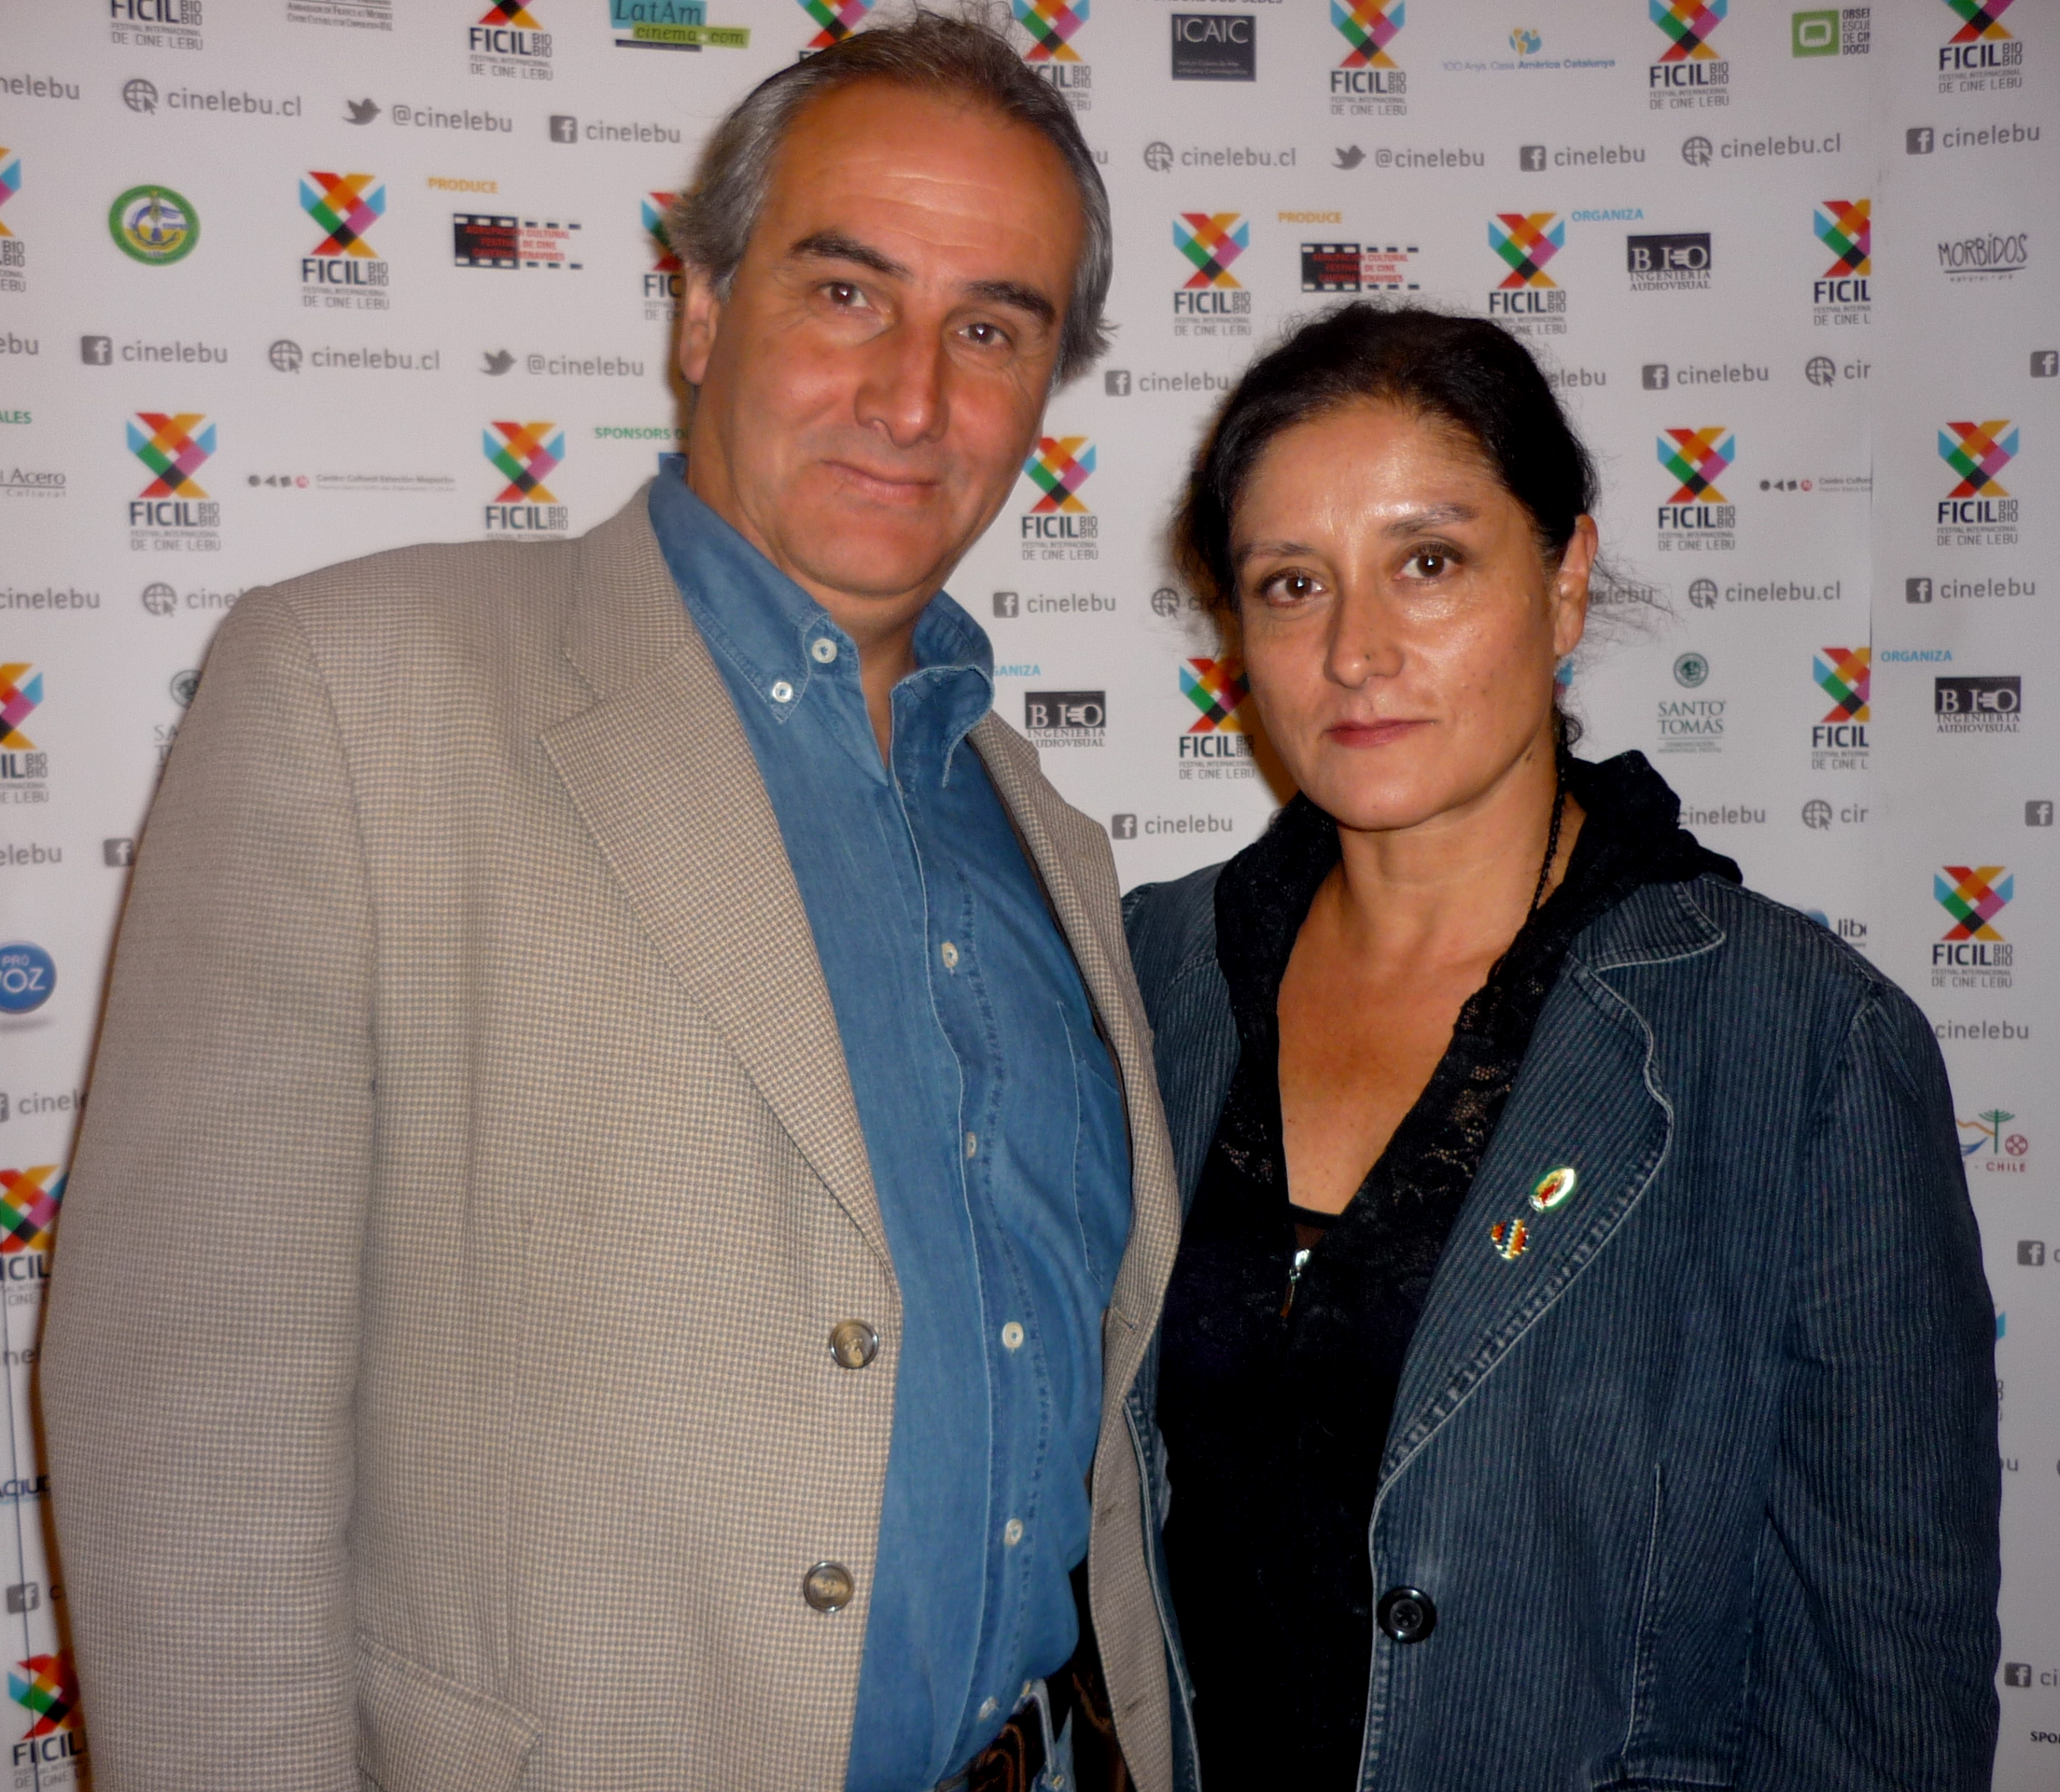 Luis Vitalino Grandón with the great chilean actress Catalina Saavedra at event of Lebu International Film Festival 2013